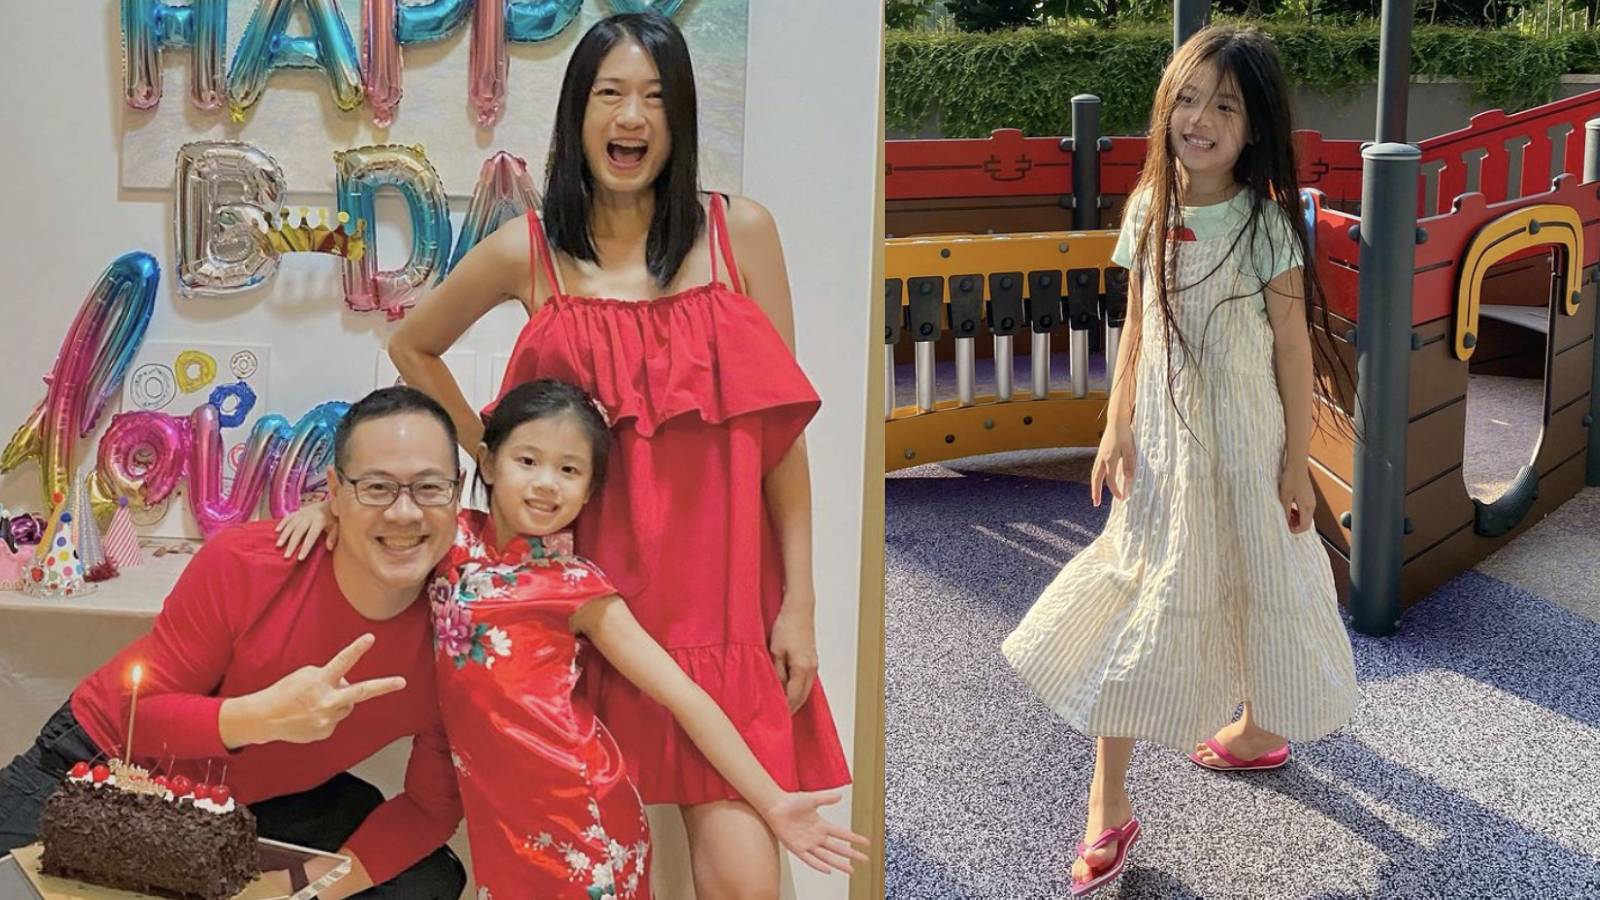 Carole Lin’s Daughter Is Only 5 But She’s Already Looking "So Grown Up", According To Her Mum